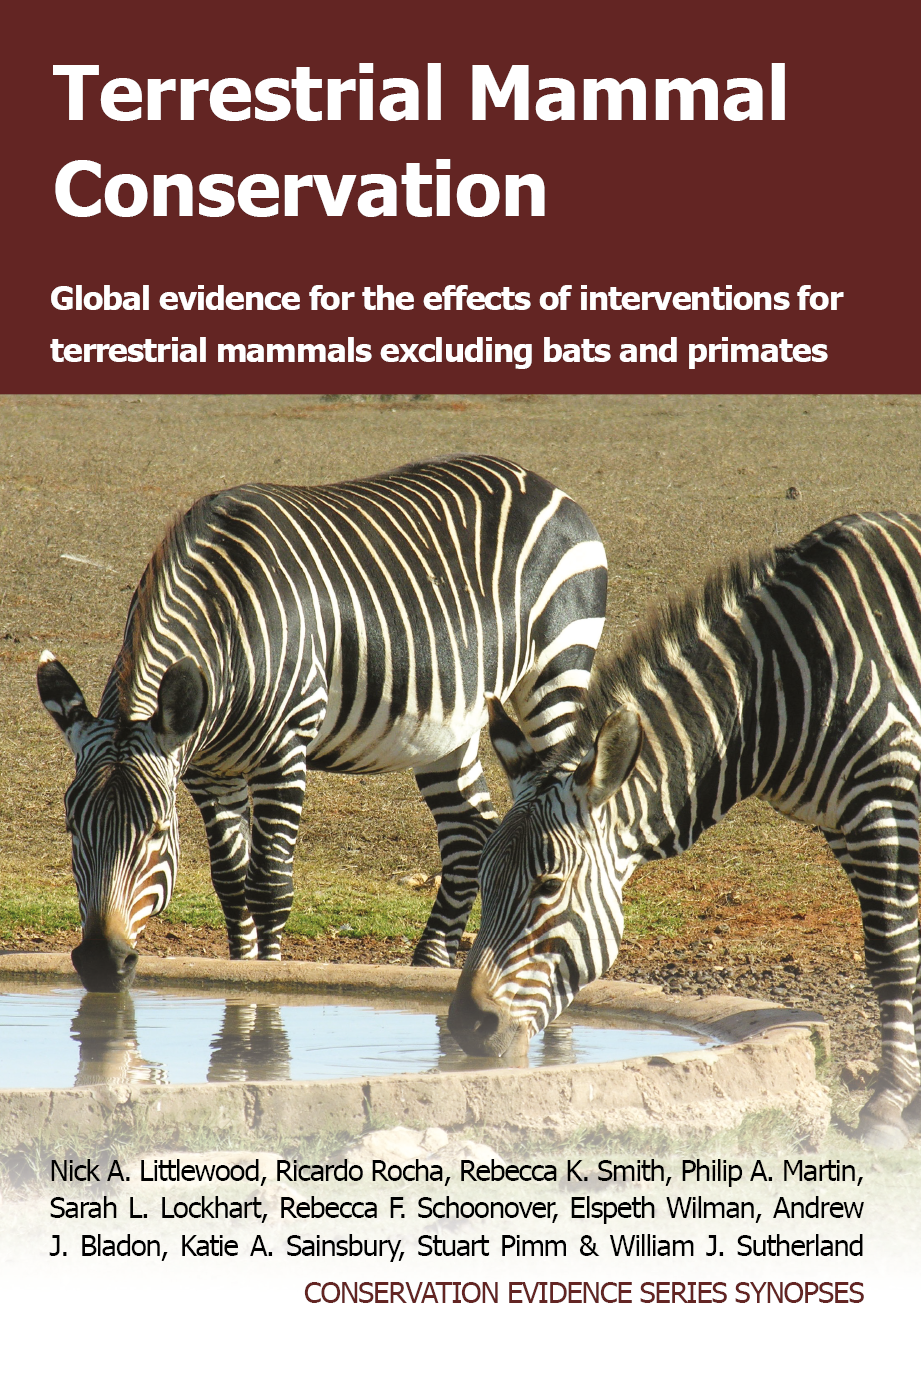 Terrestrial Mammal Conservation book cover image